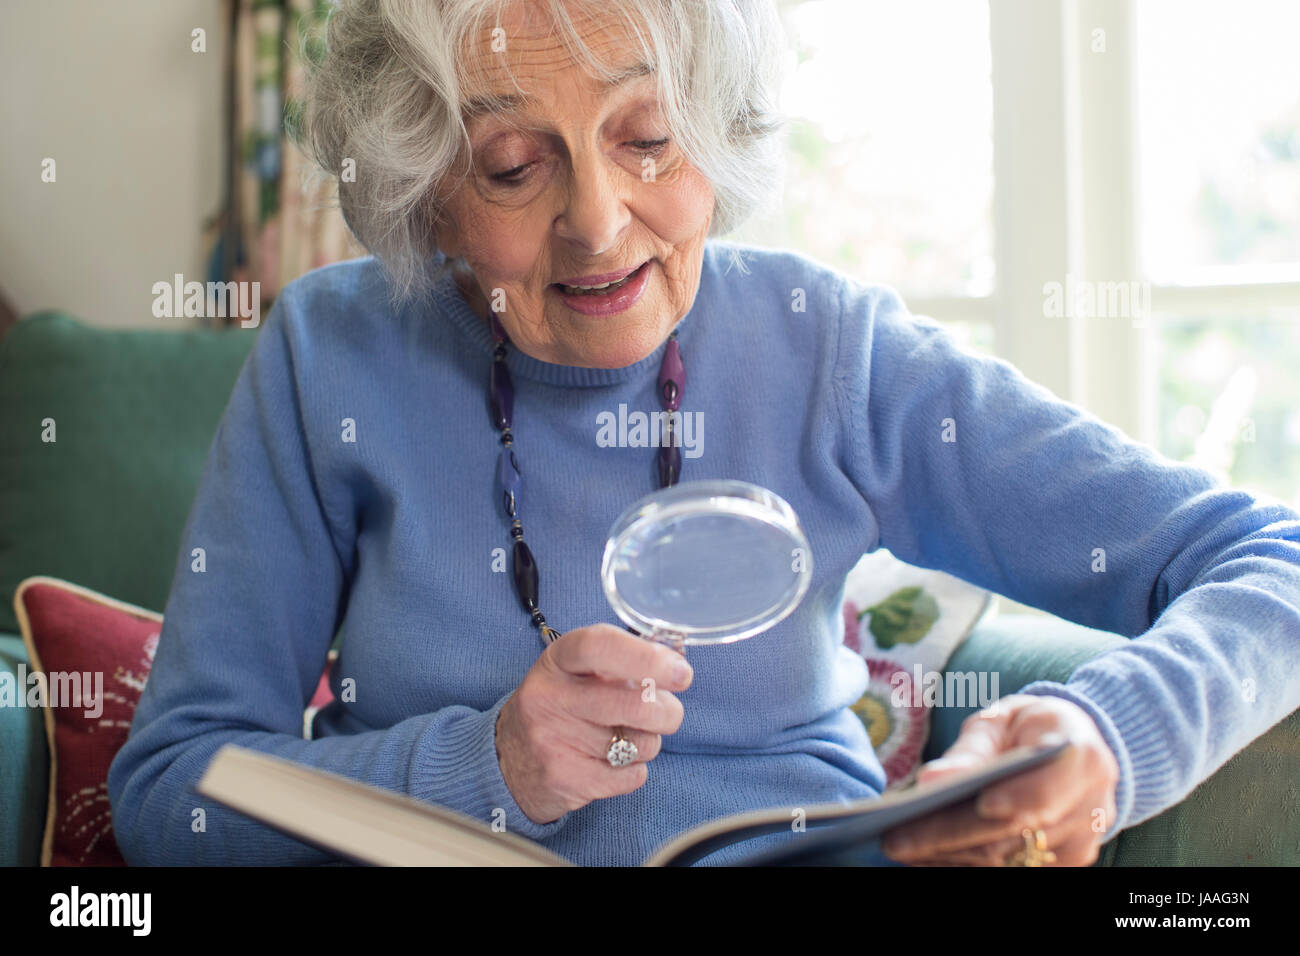 Senior Woman At Home Reading Book Using Magnifying Glass Stock Photo